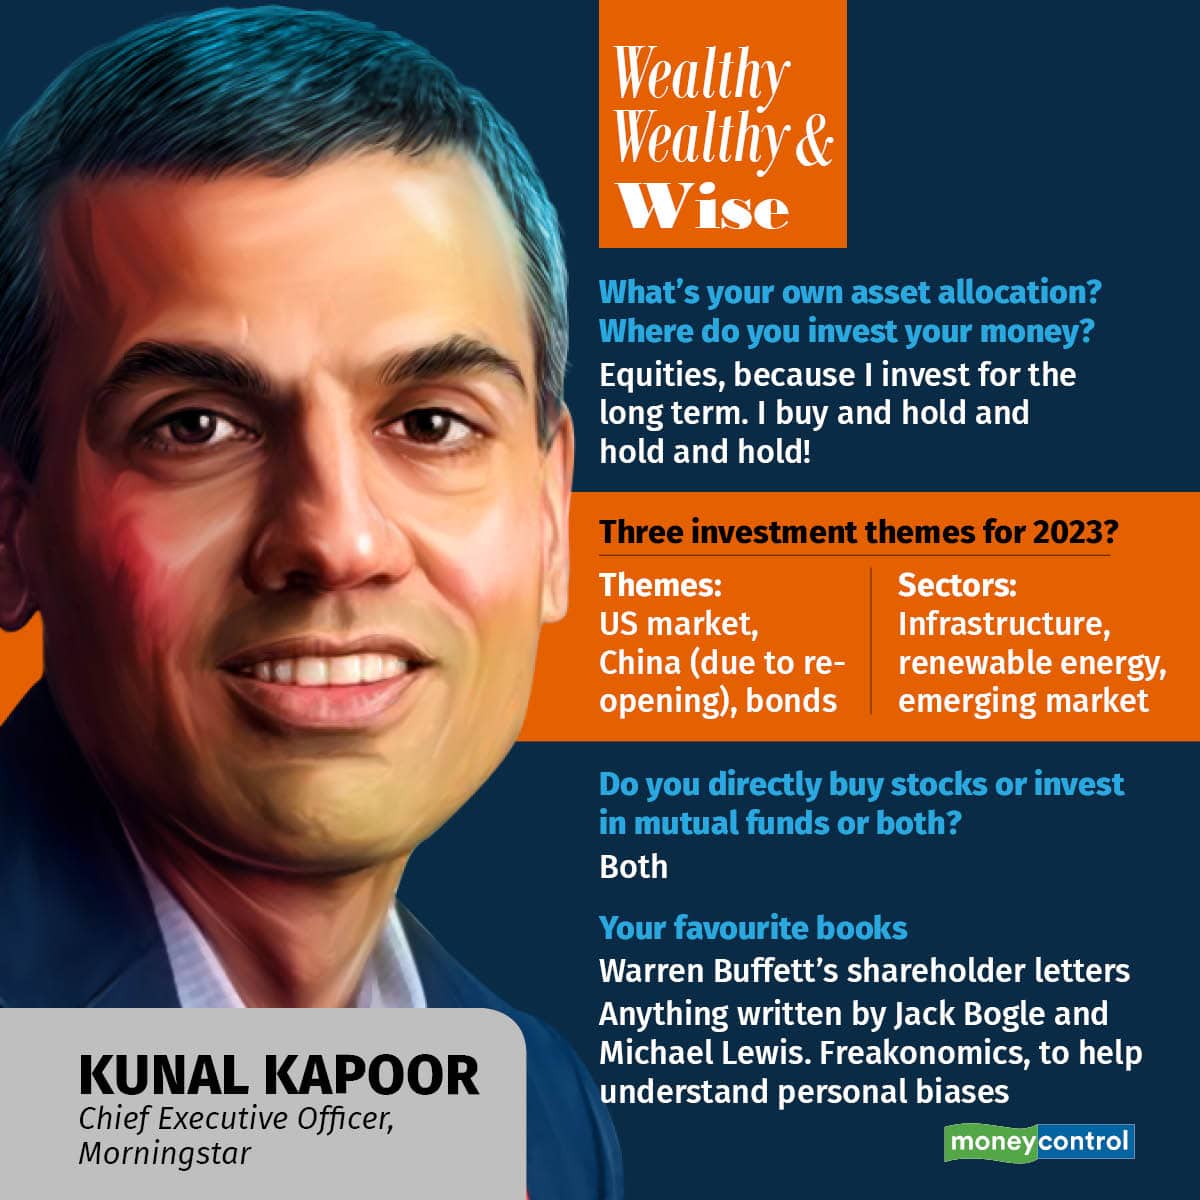 Kunal Kapoor, CEO of Morningstar invests a small portion of his portfolio in India through an ETF focussed towards India and also through emerging market and global funds that invest in India